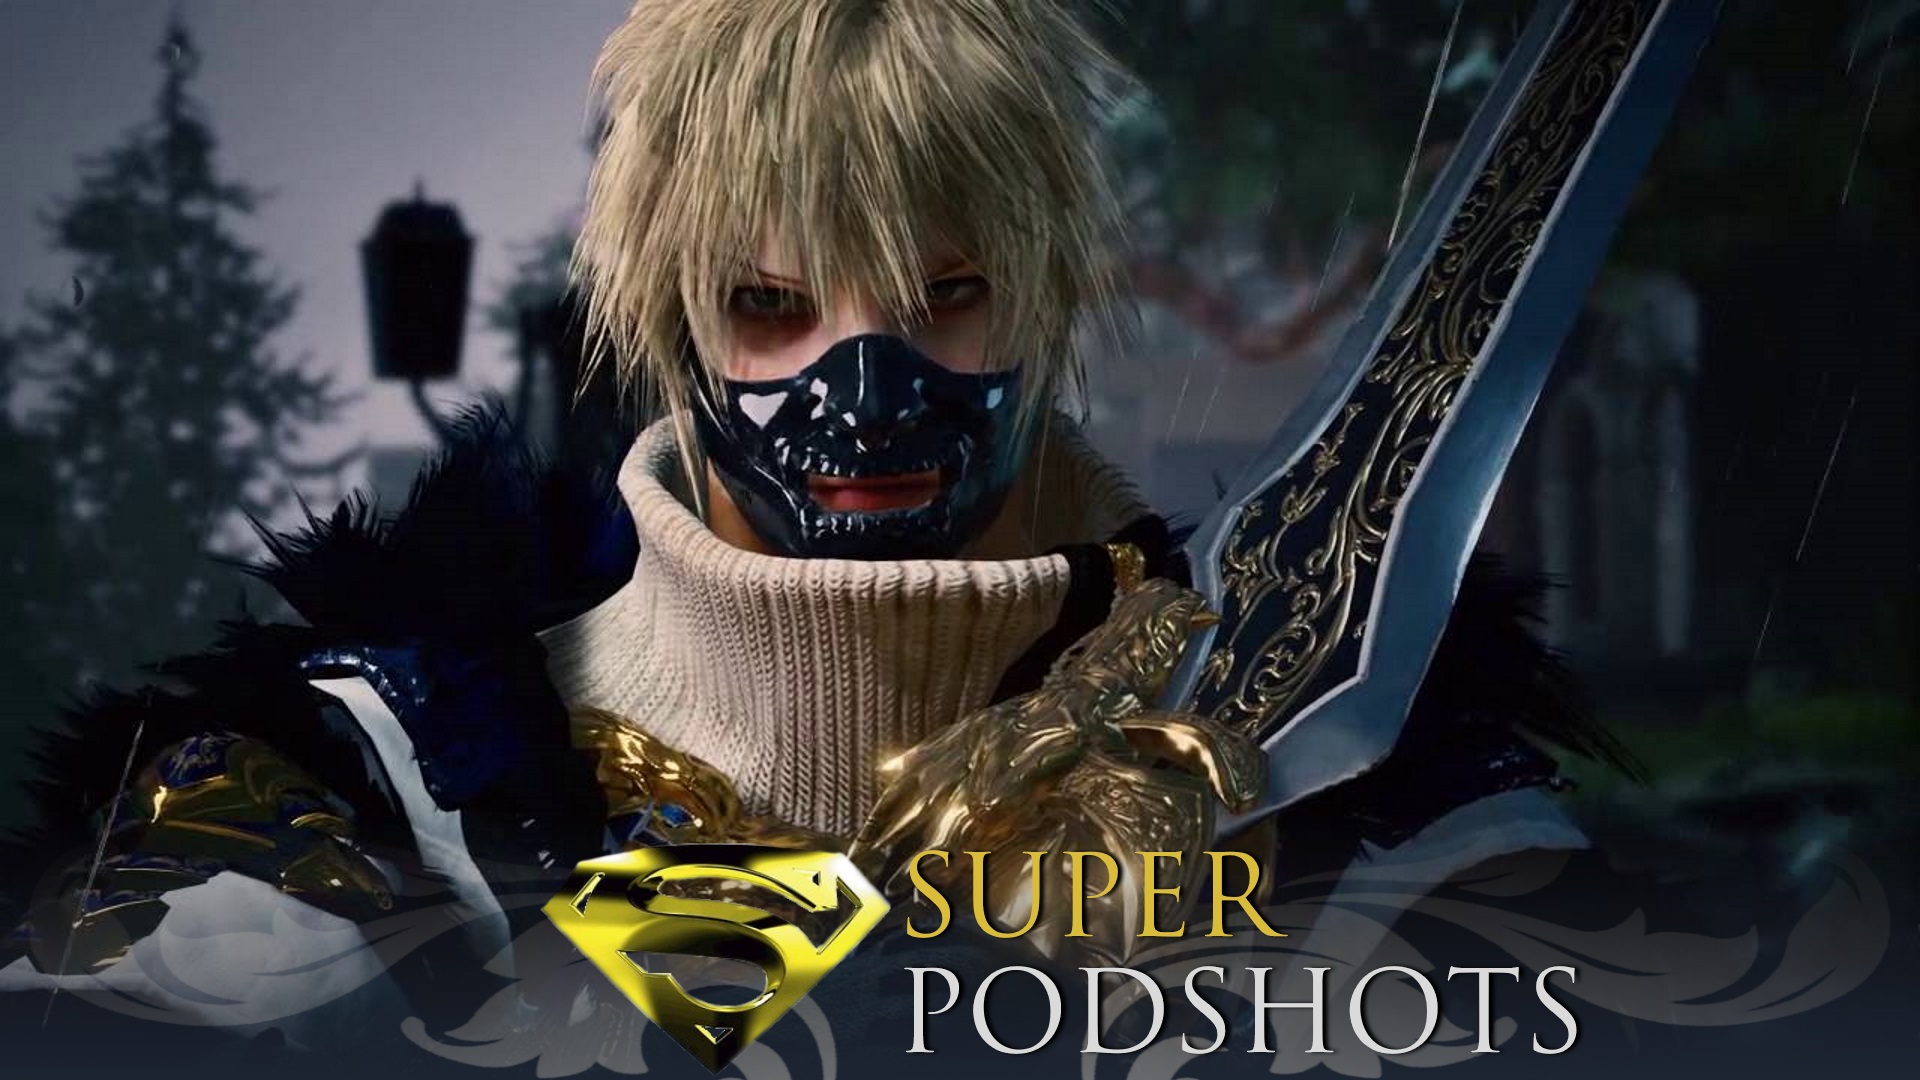 Super Podshots Ep. 54 - Xbox Slim Makes a Difference, Lost Soul Aside & HDR Gaming